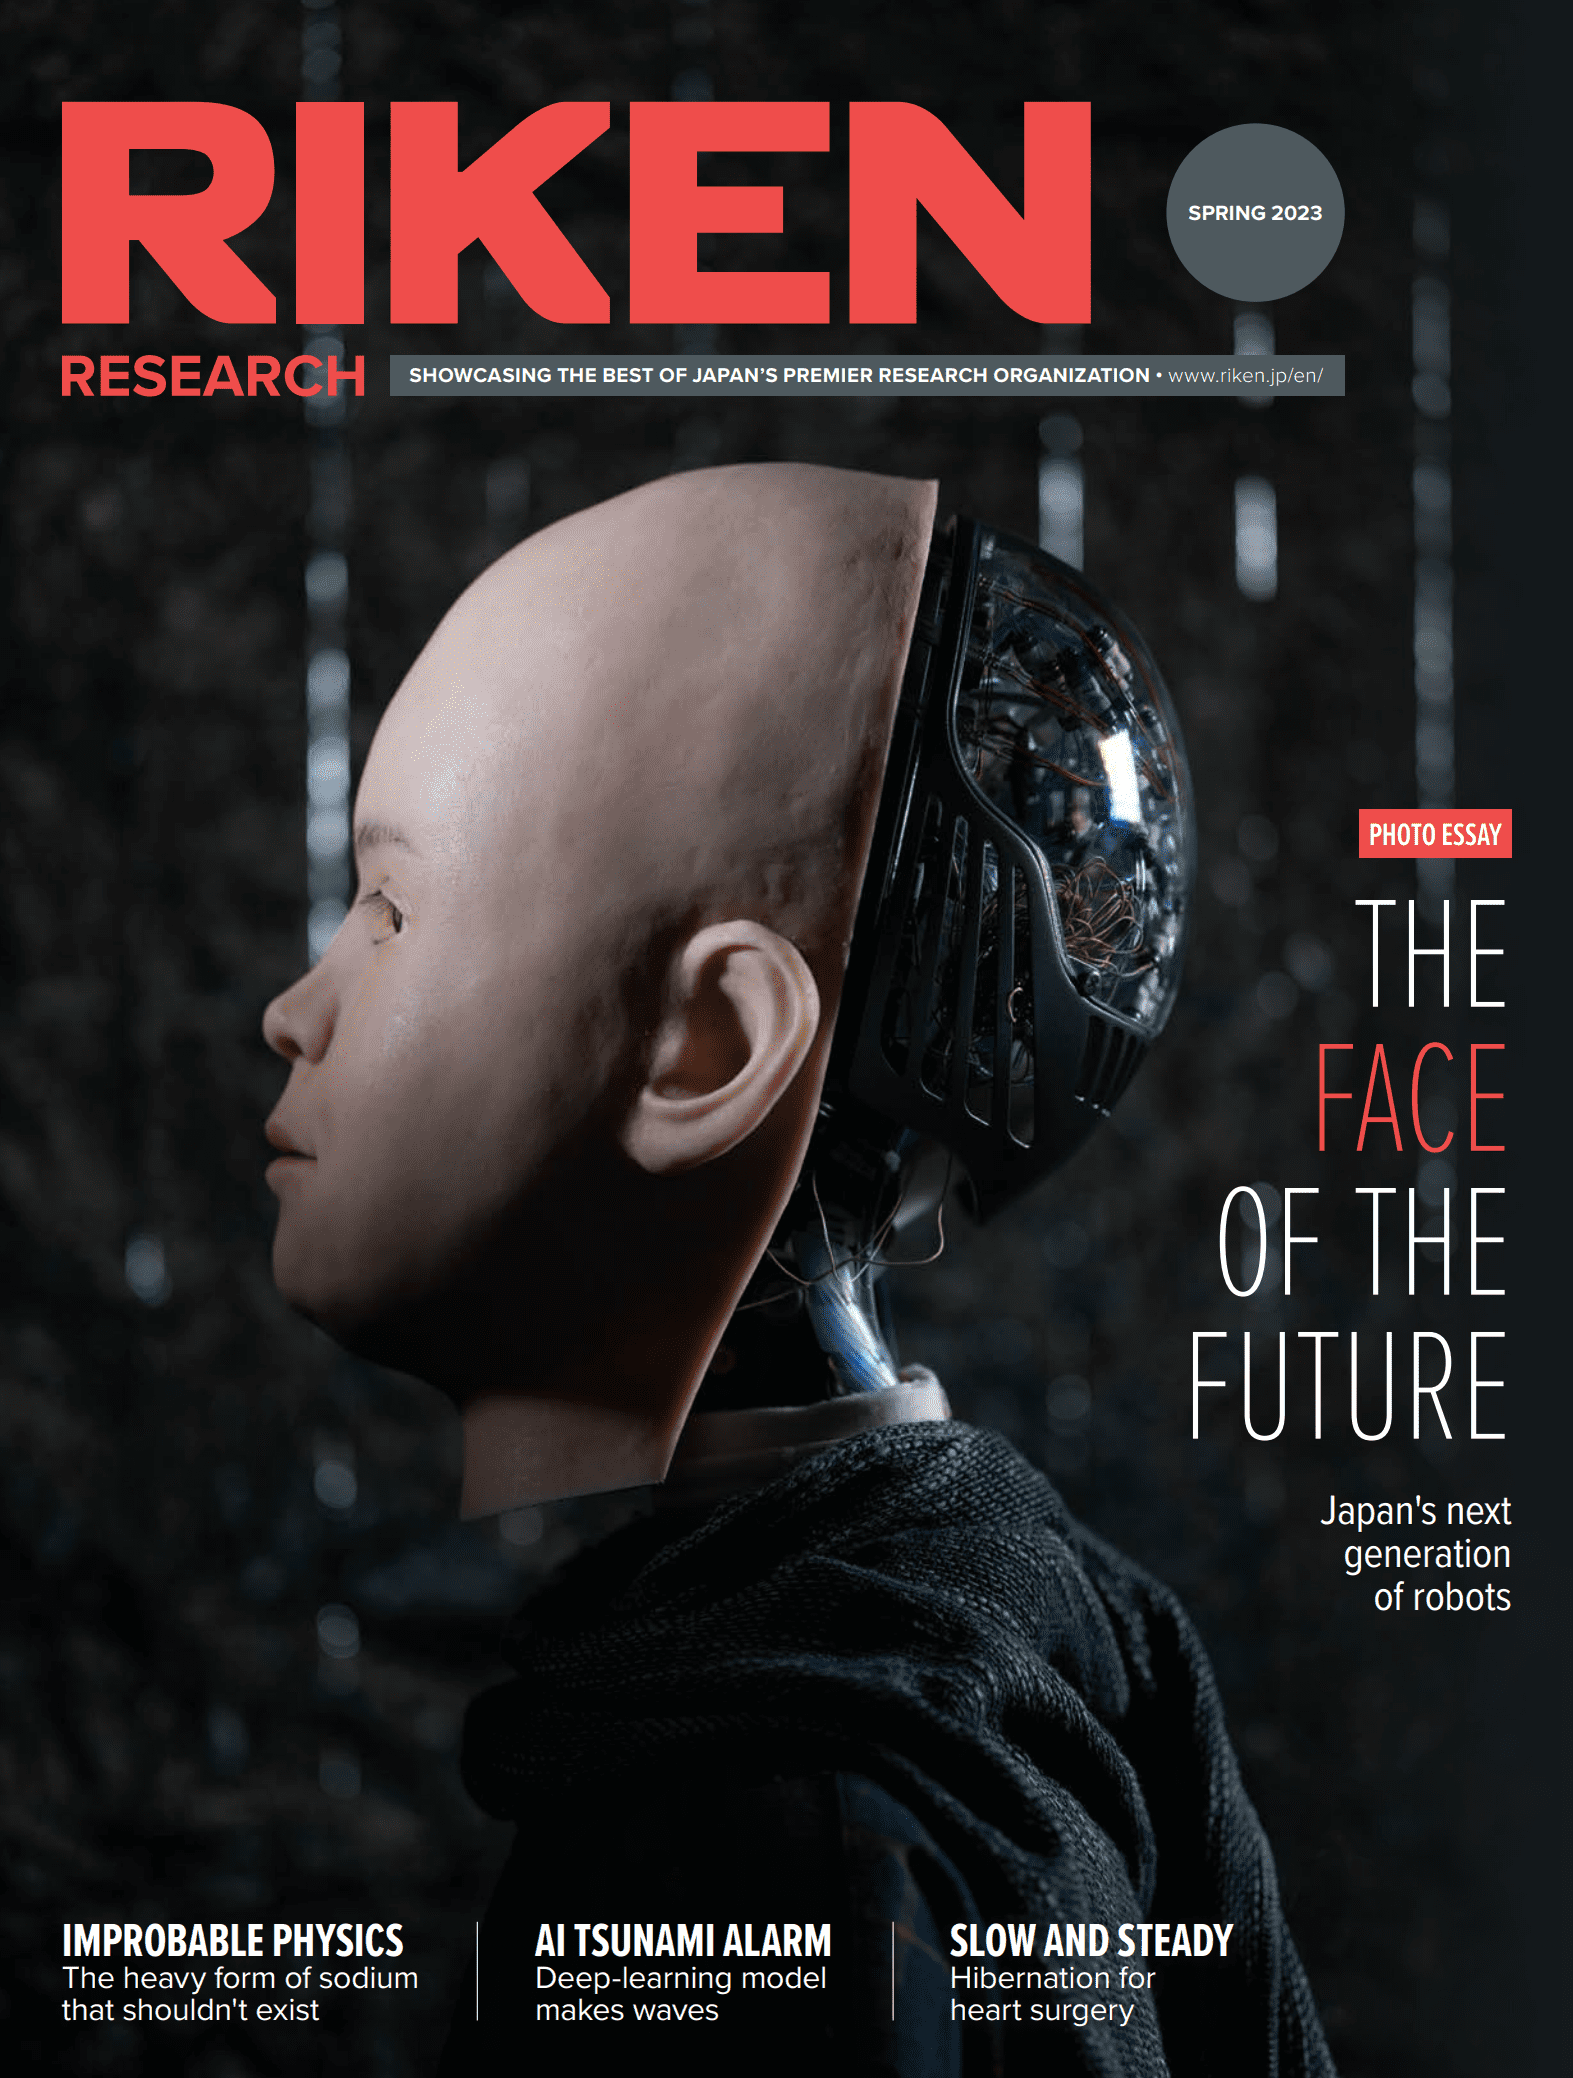 The Guardian Robot Project has been featured as a cover story in the latest RIKEN Research Spring 2023